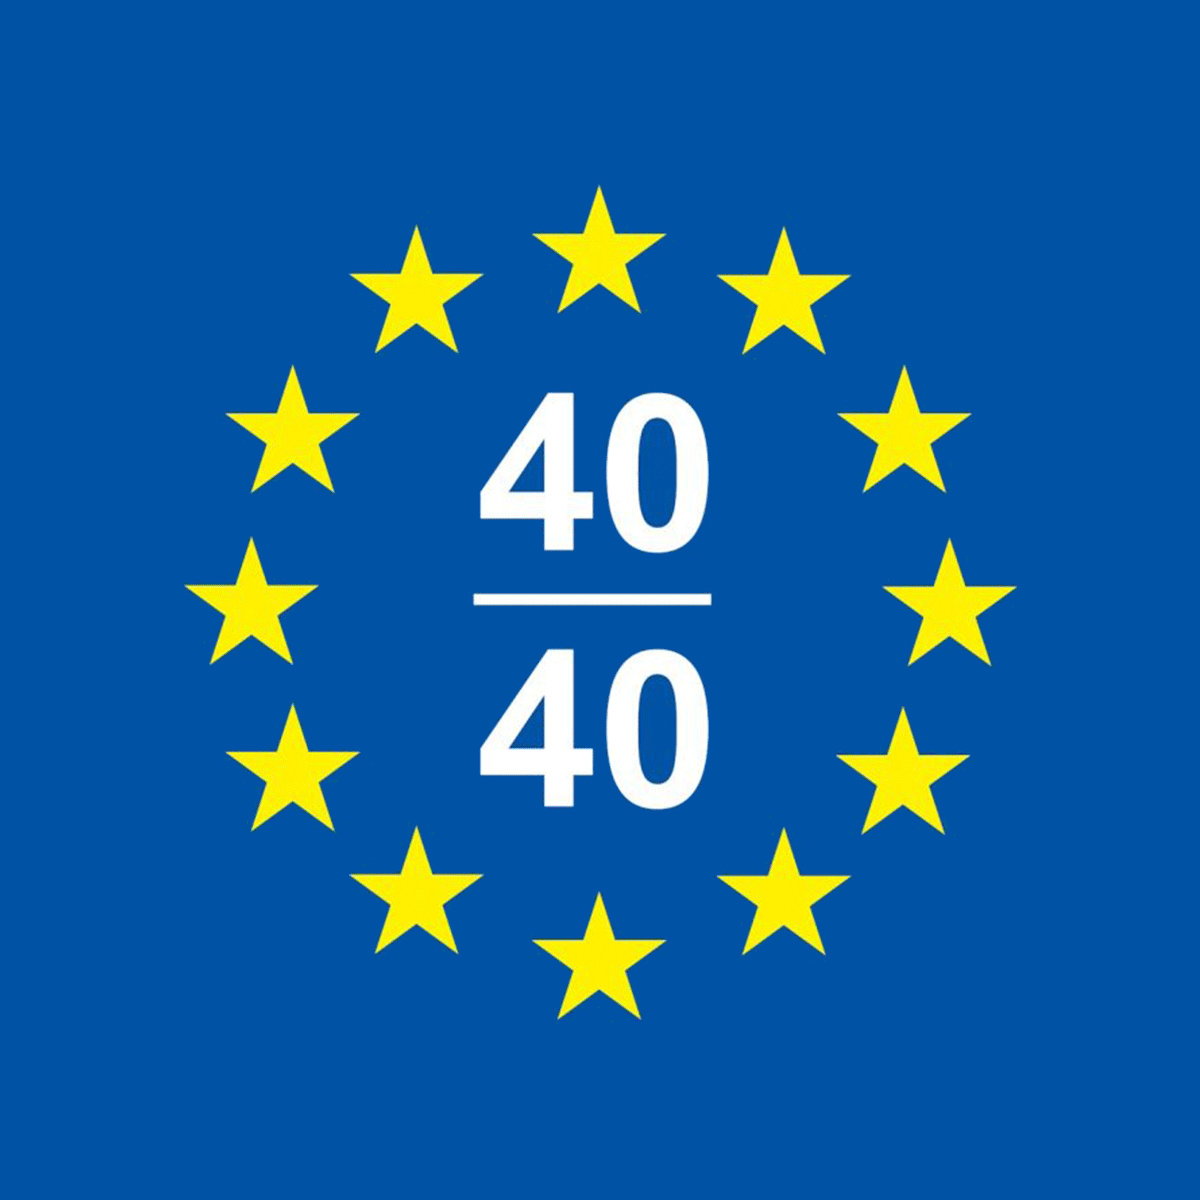 Europe 40 Under 40 Call For Entries